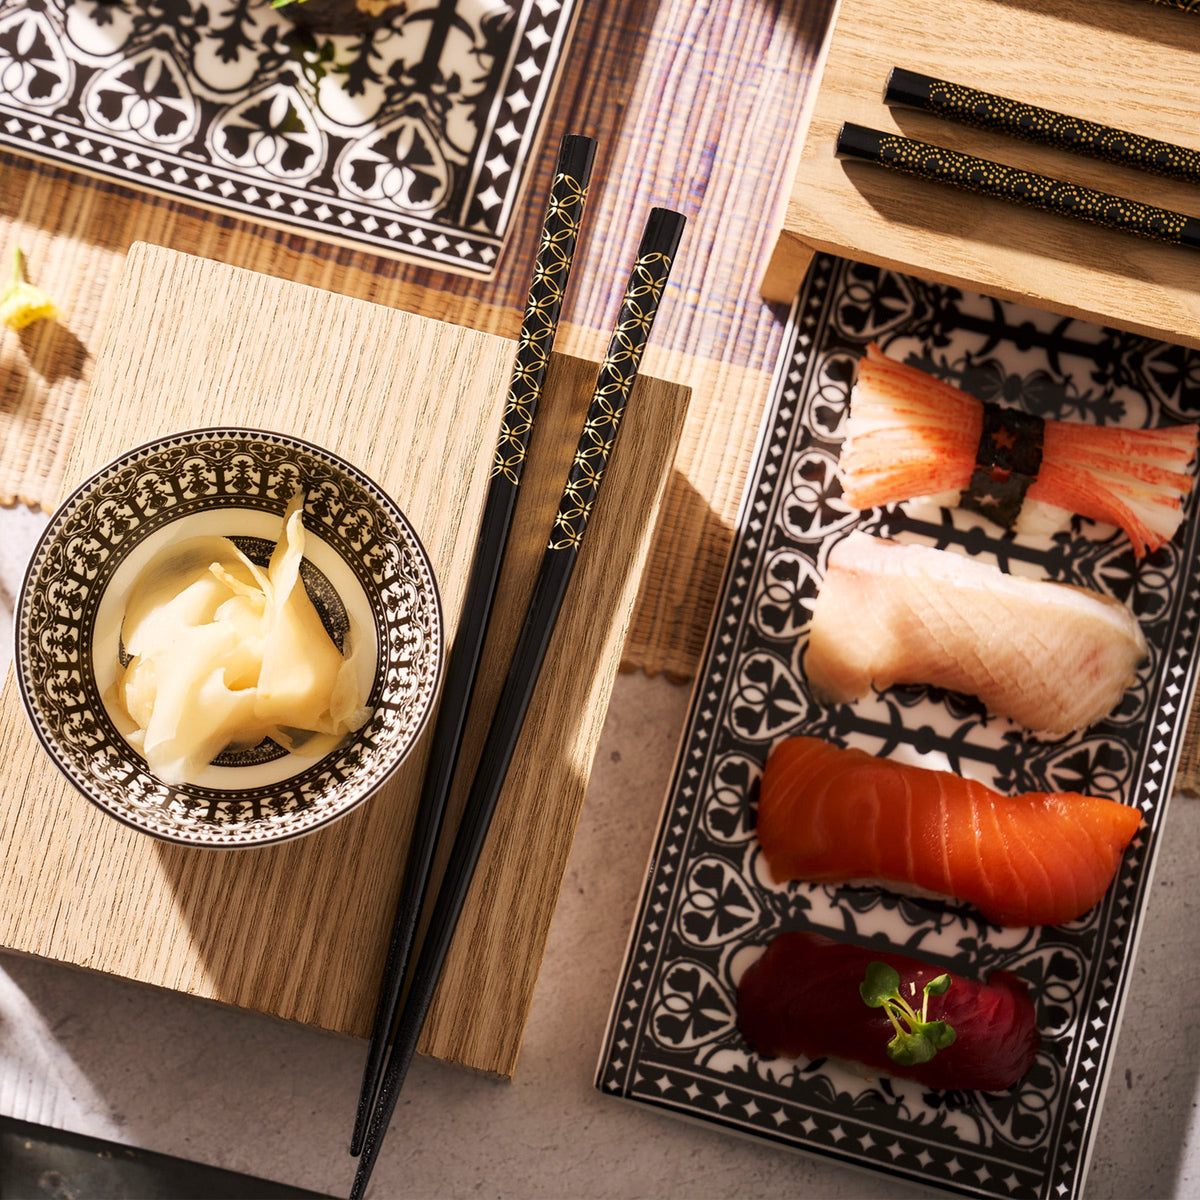 Japanese food adorned with gold patterns, served on a lacquered wood table with Osaka Chopsticks from Miya, Inc.